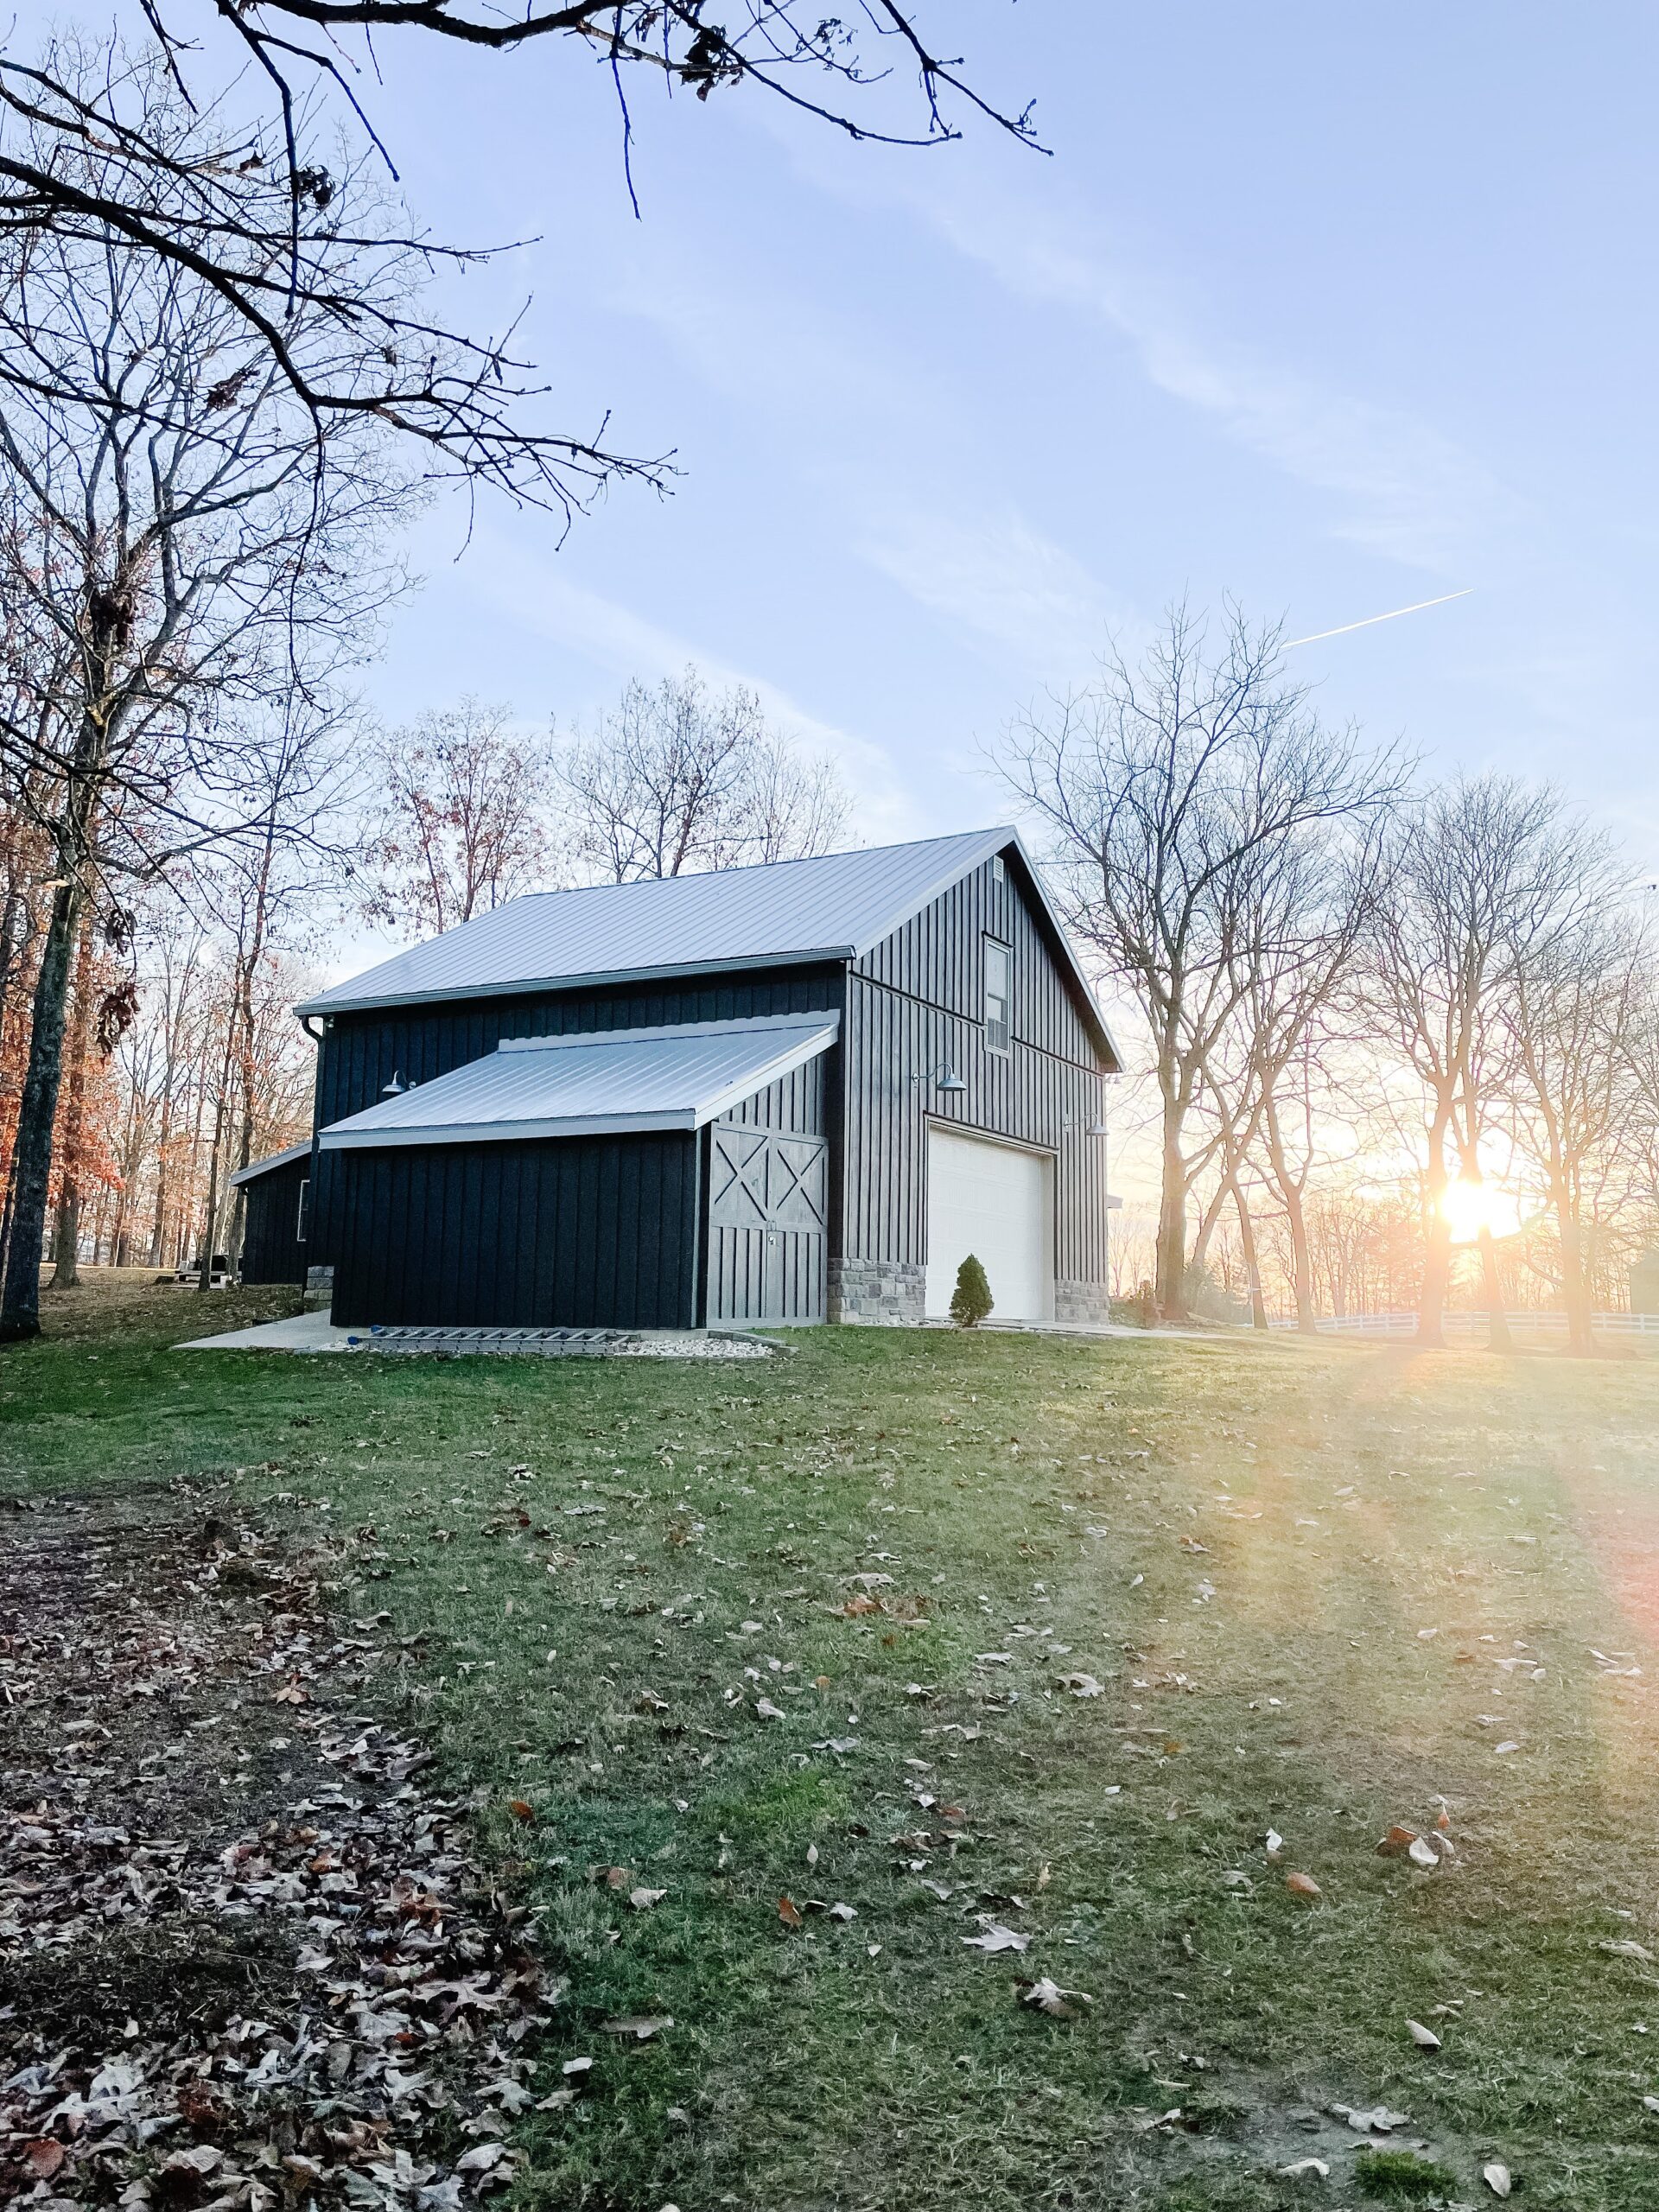 Black Barn with garage door on a winter day with sun setting next to the barn